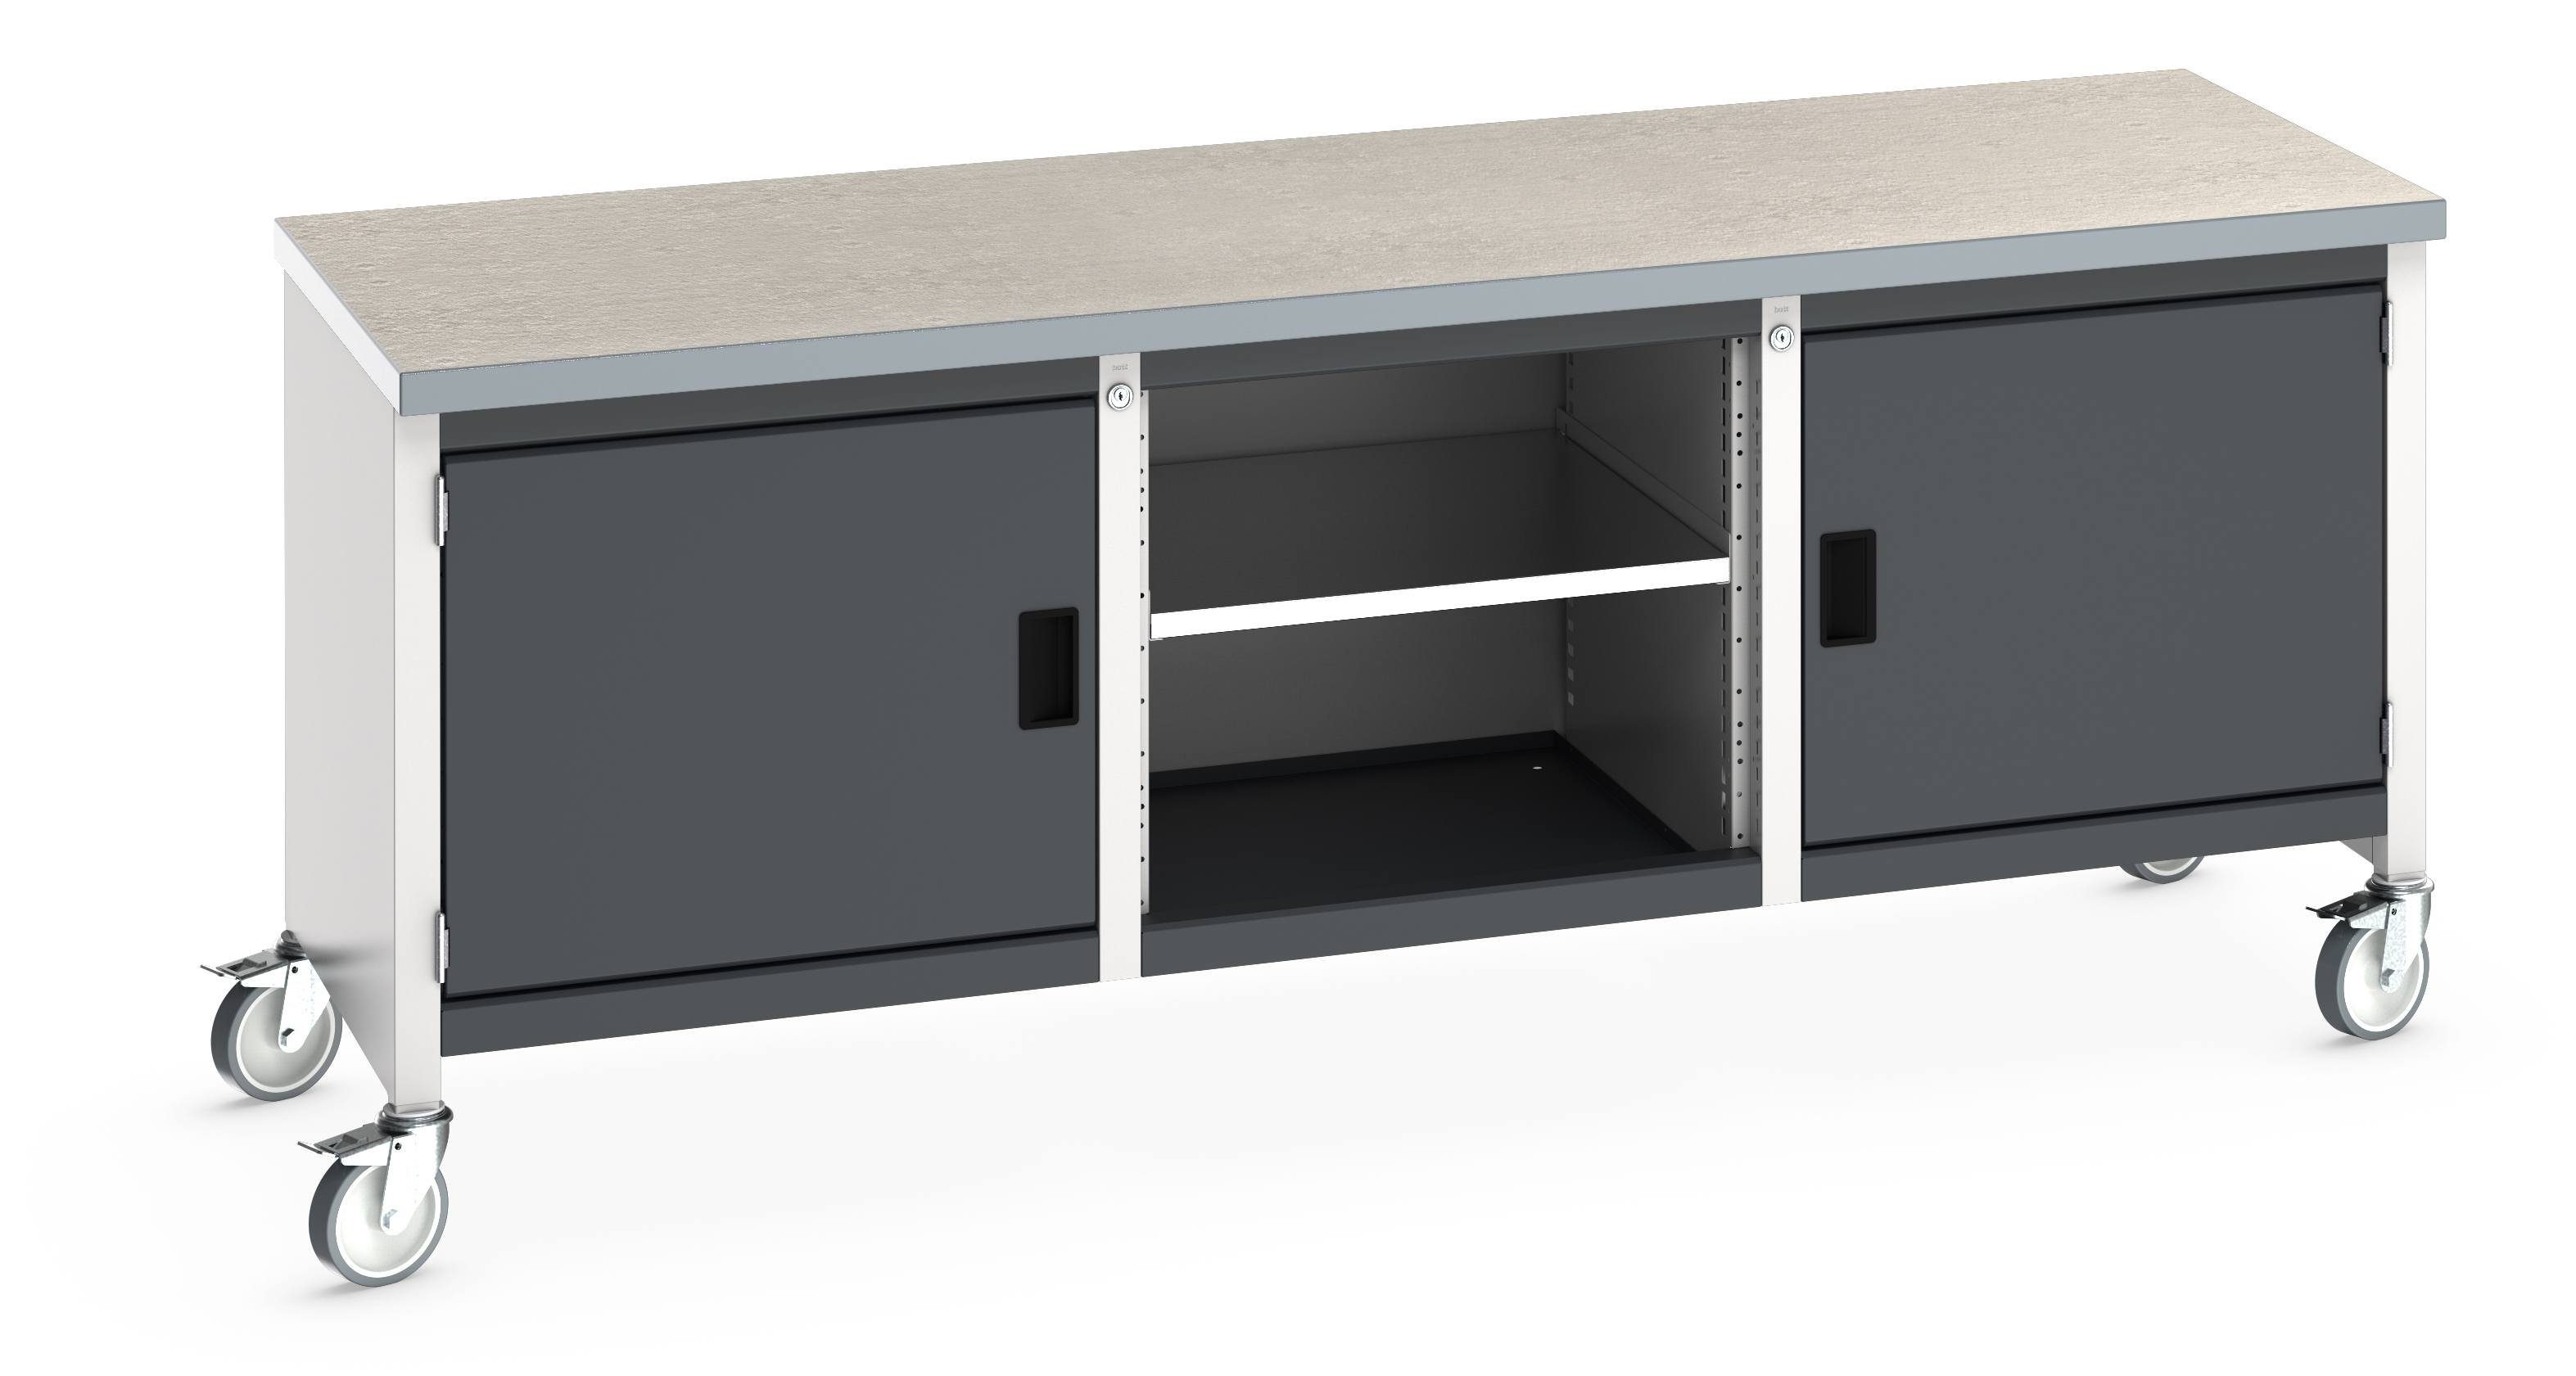 Bott Cubio Mobile Storage Bench With Full Cupboard / Open Cupboard /Full Cupboard - 41002120.19V